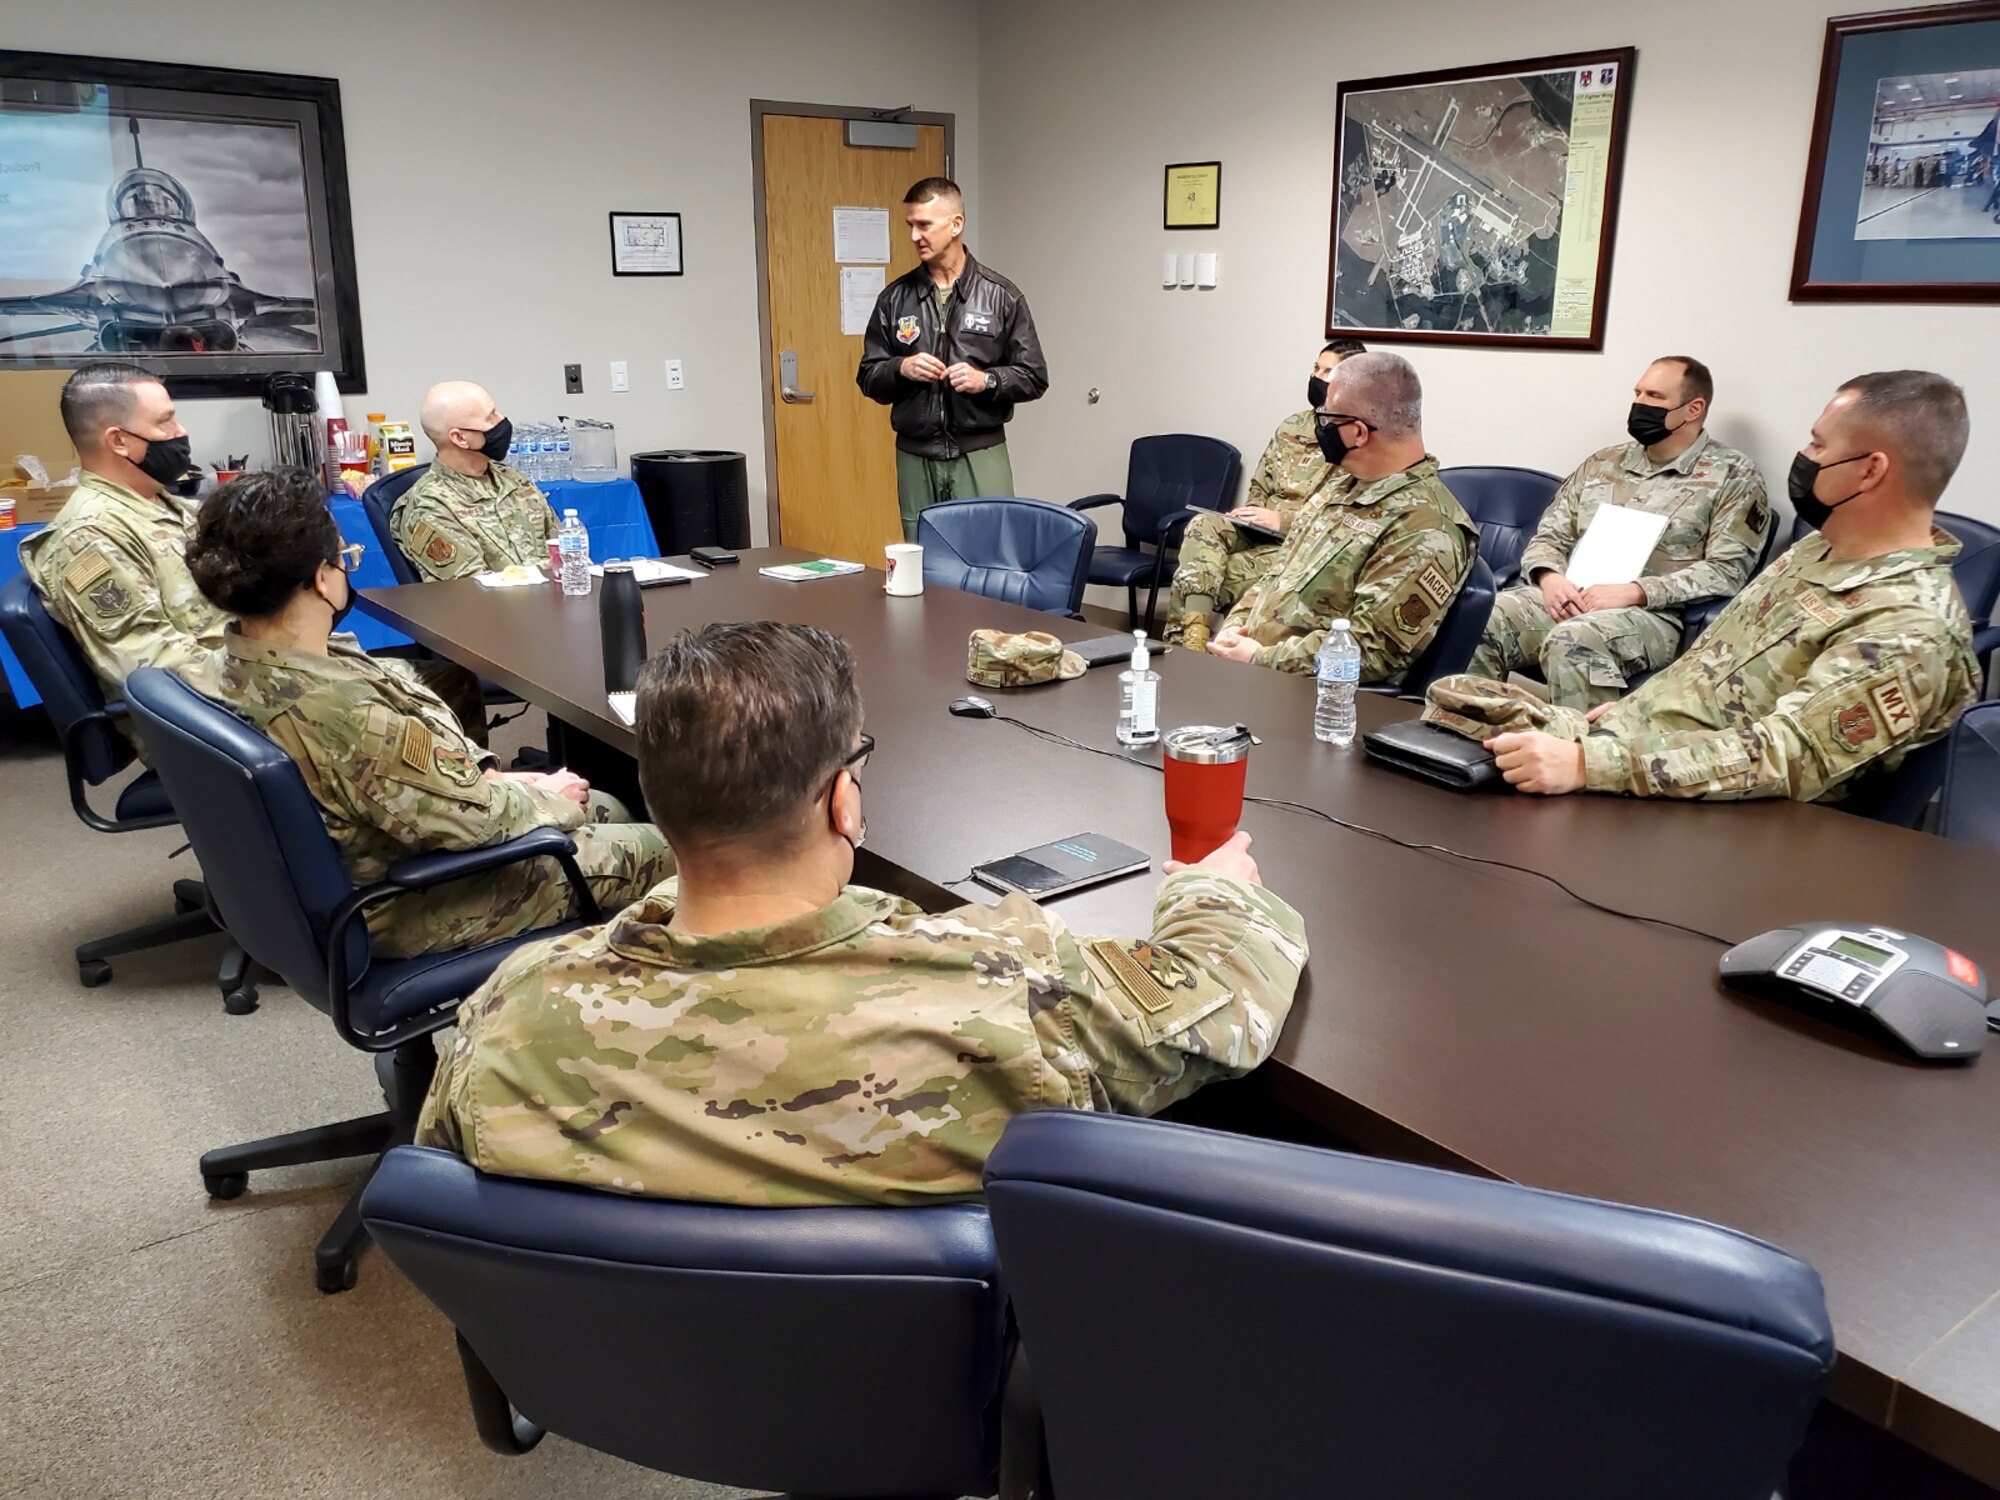 An image of U.S. Air Force Col. Derek B. Routt, commander of the 177th Fighter Wing of the New Jersey Air National Guard, briefing Brig. Gen. Donald K. Carpenter, National Guard Bureau Director of Logistics, Engineering and Force Protection, and senior leadership during the Air National Guard's first Production Assessment Team visit.